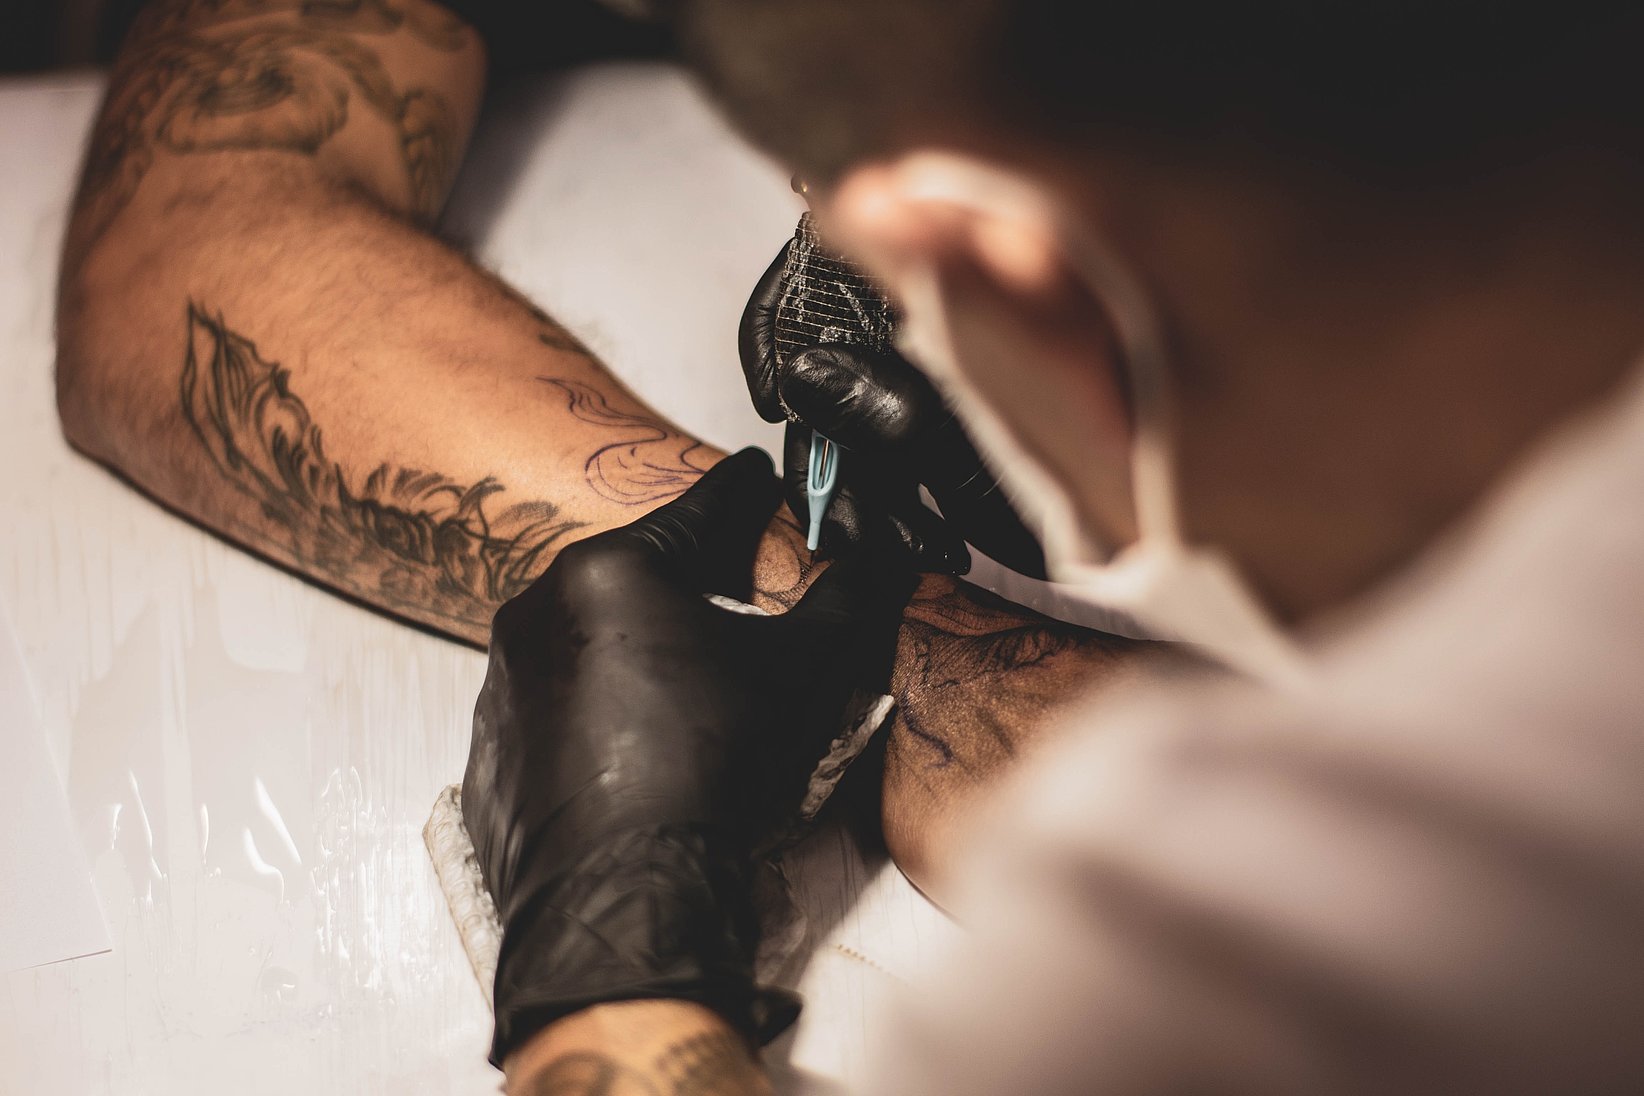 A tattoo artist is about to engrave a new tattoo on a customer's arm.